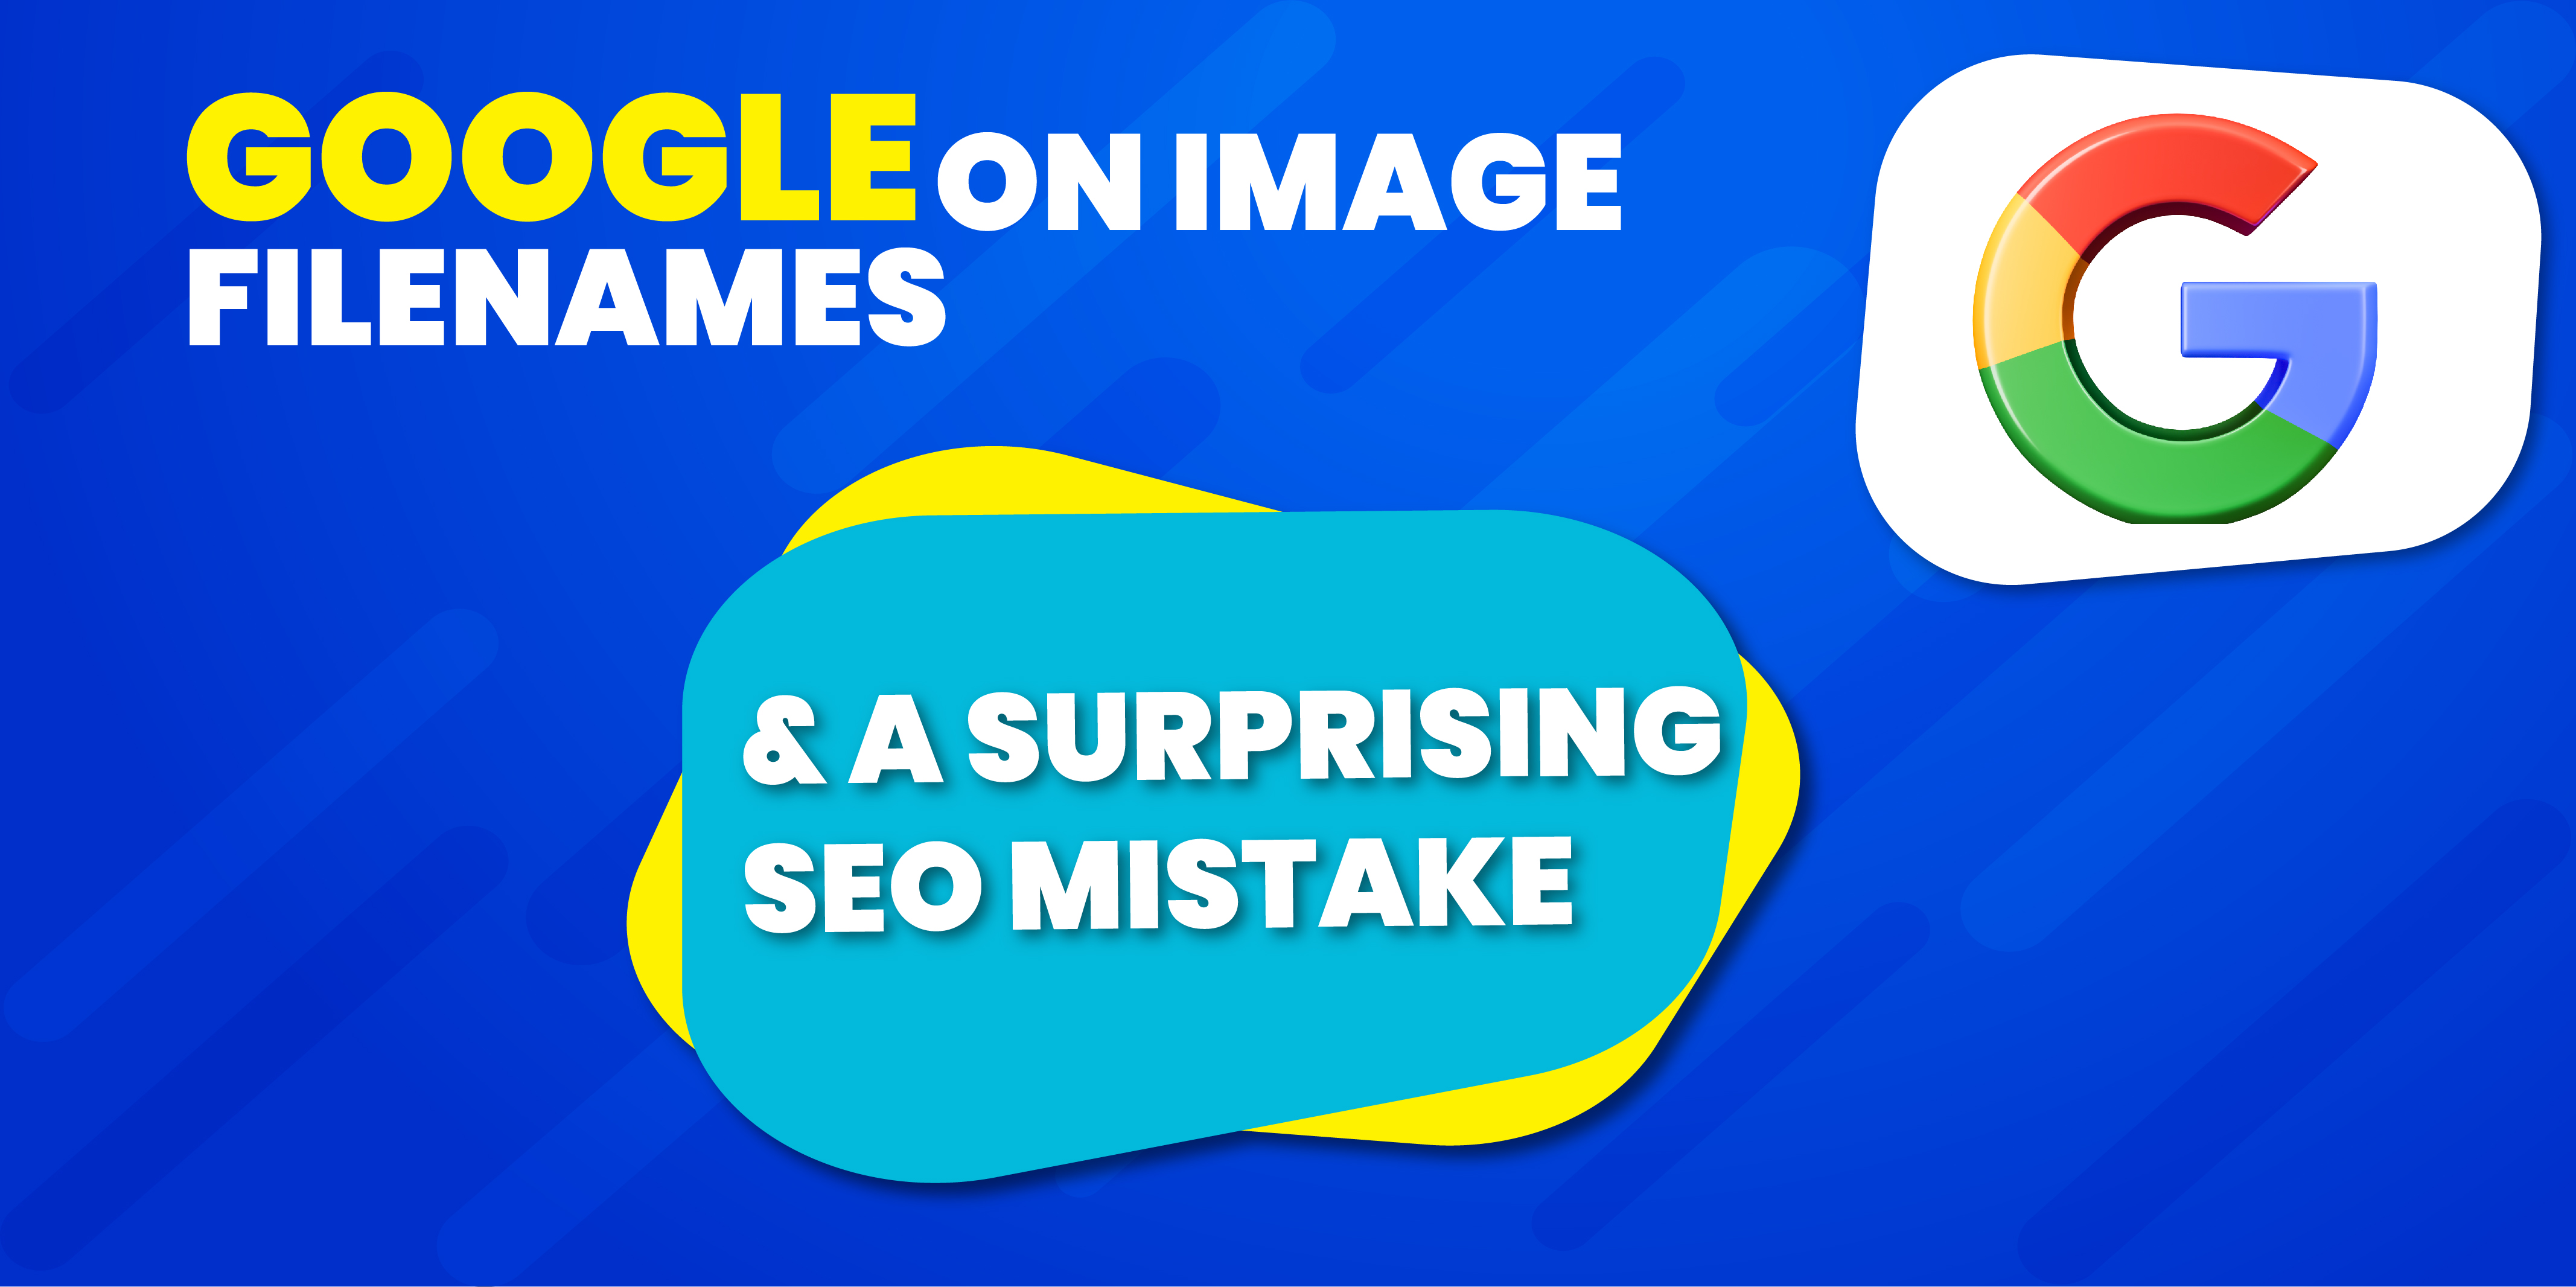 Importance Of Image Filenames & The SEO Mistake You Must Avoid